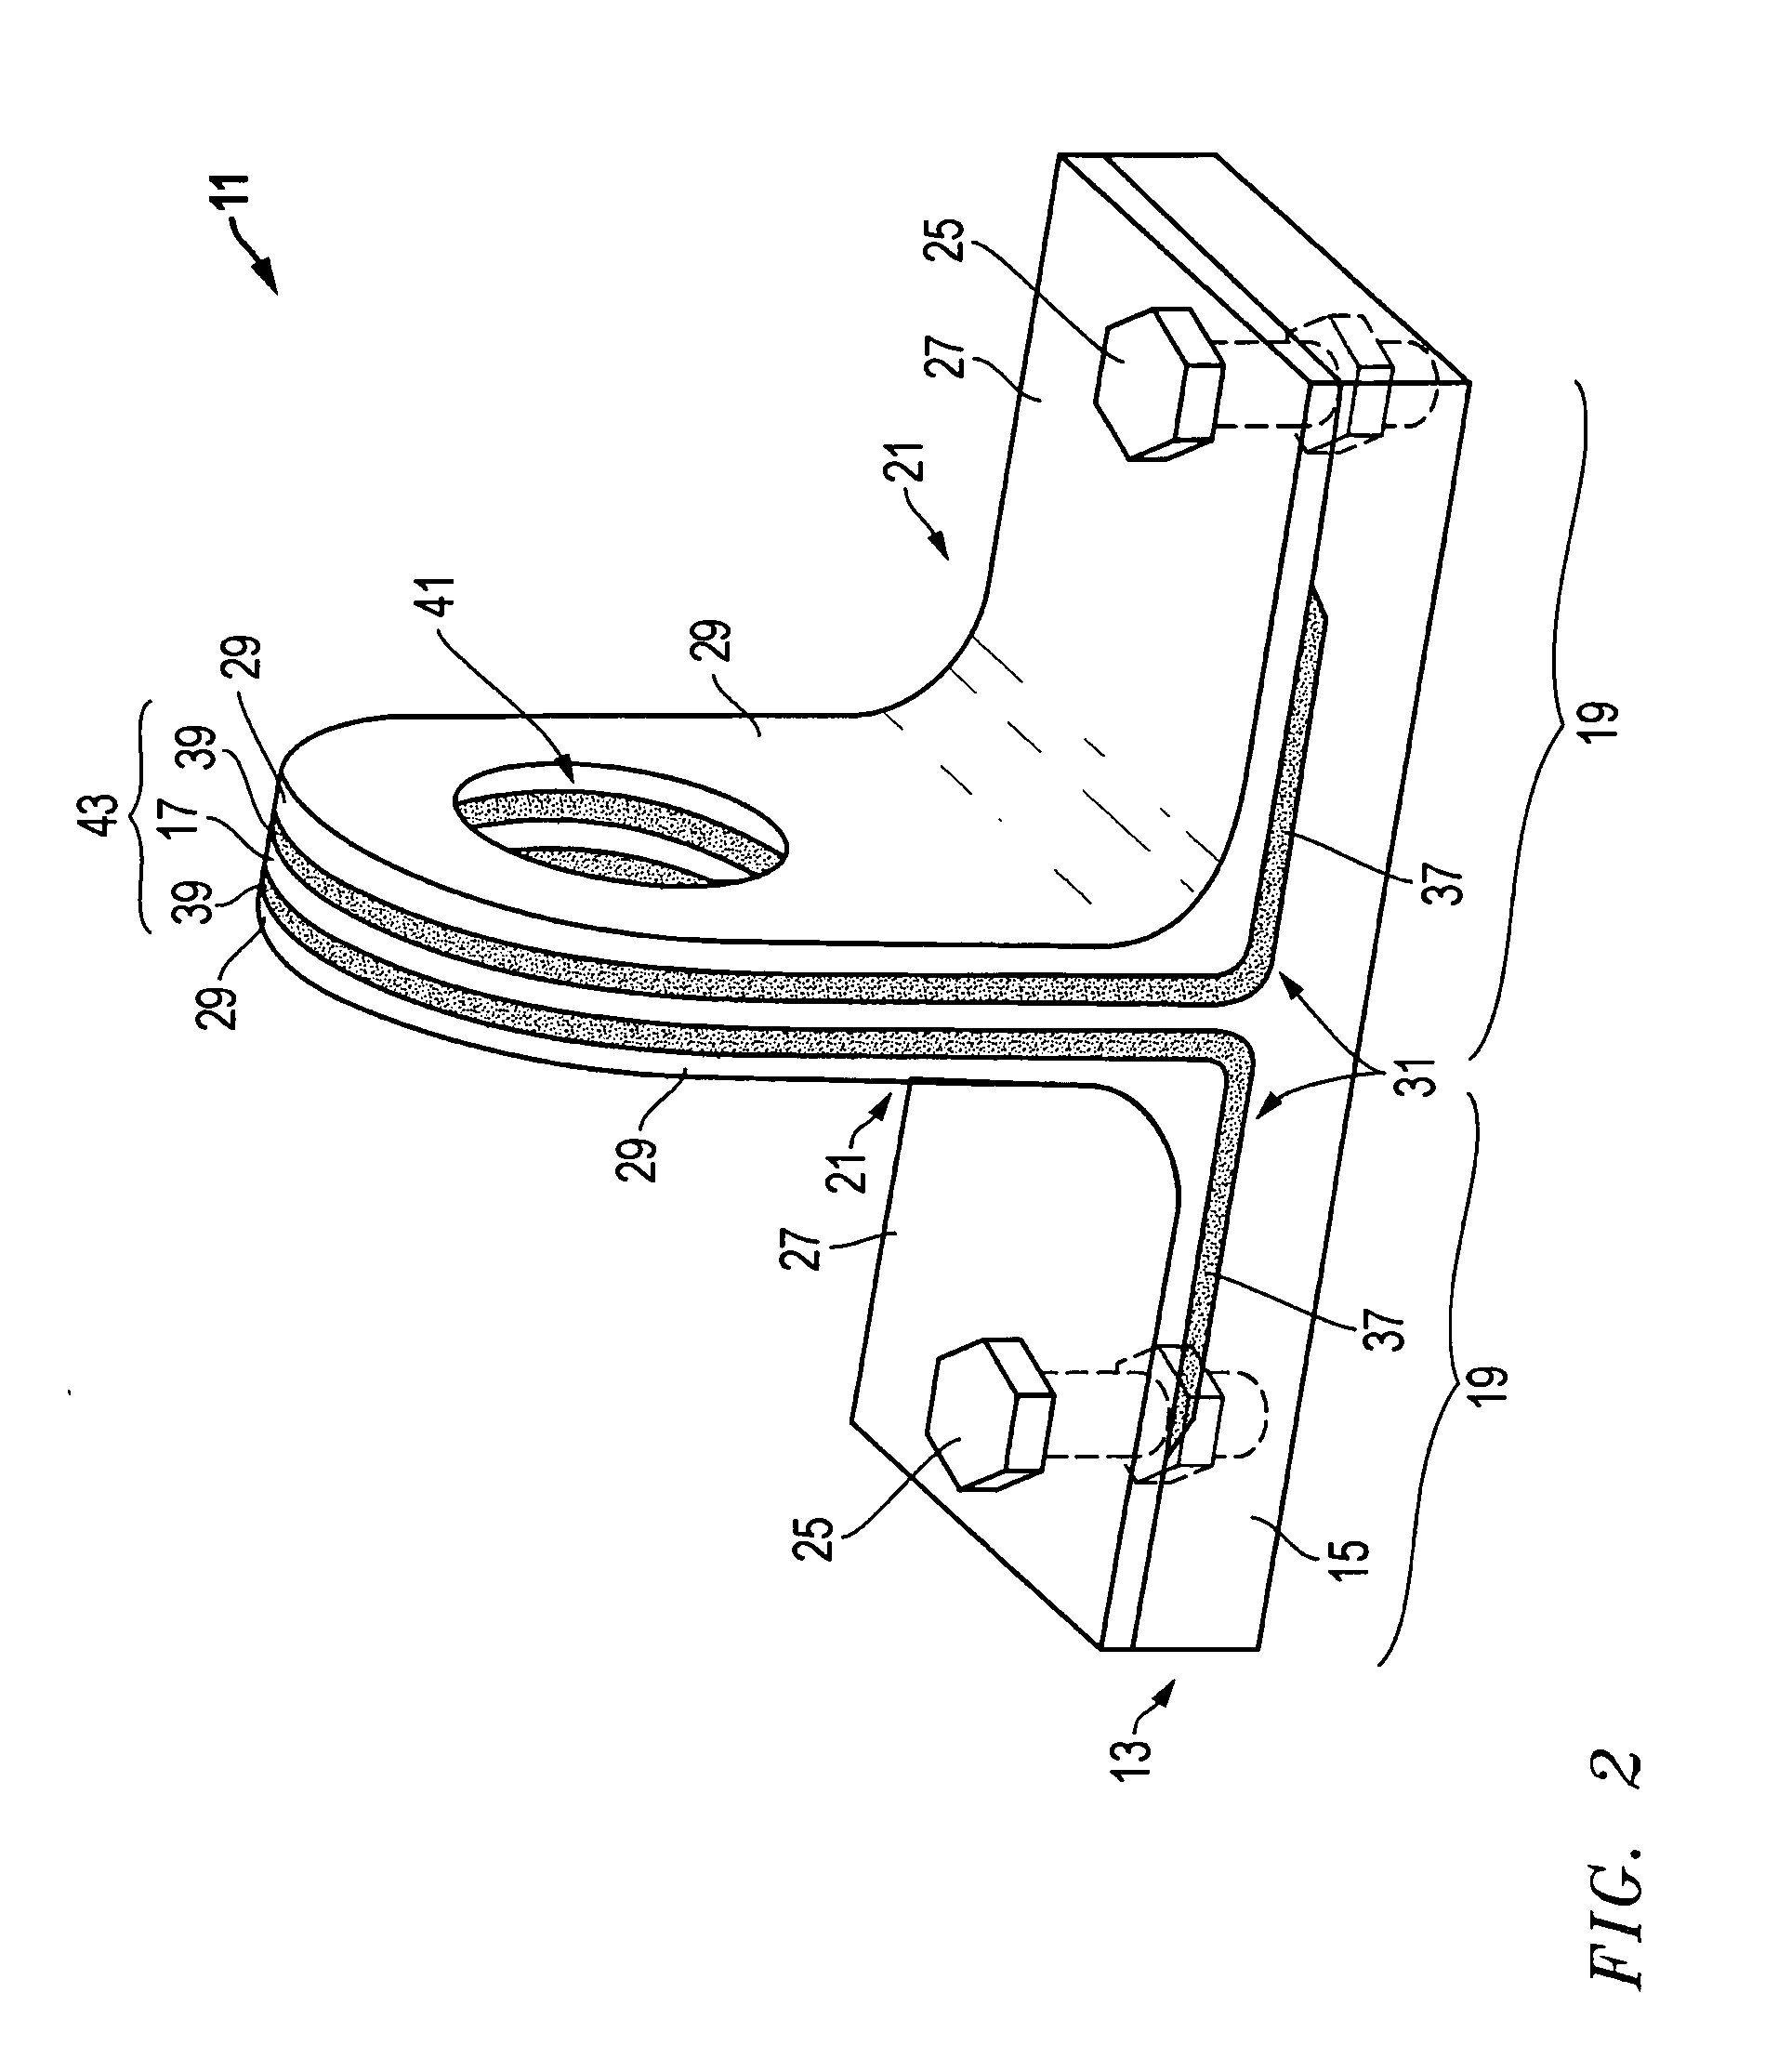 System, method, and apparatus for structural lug formed from a combination of metal and composite laminate materials